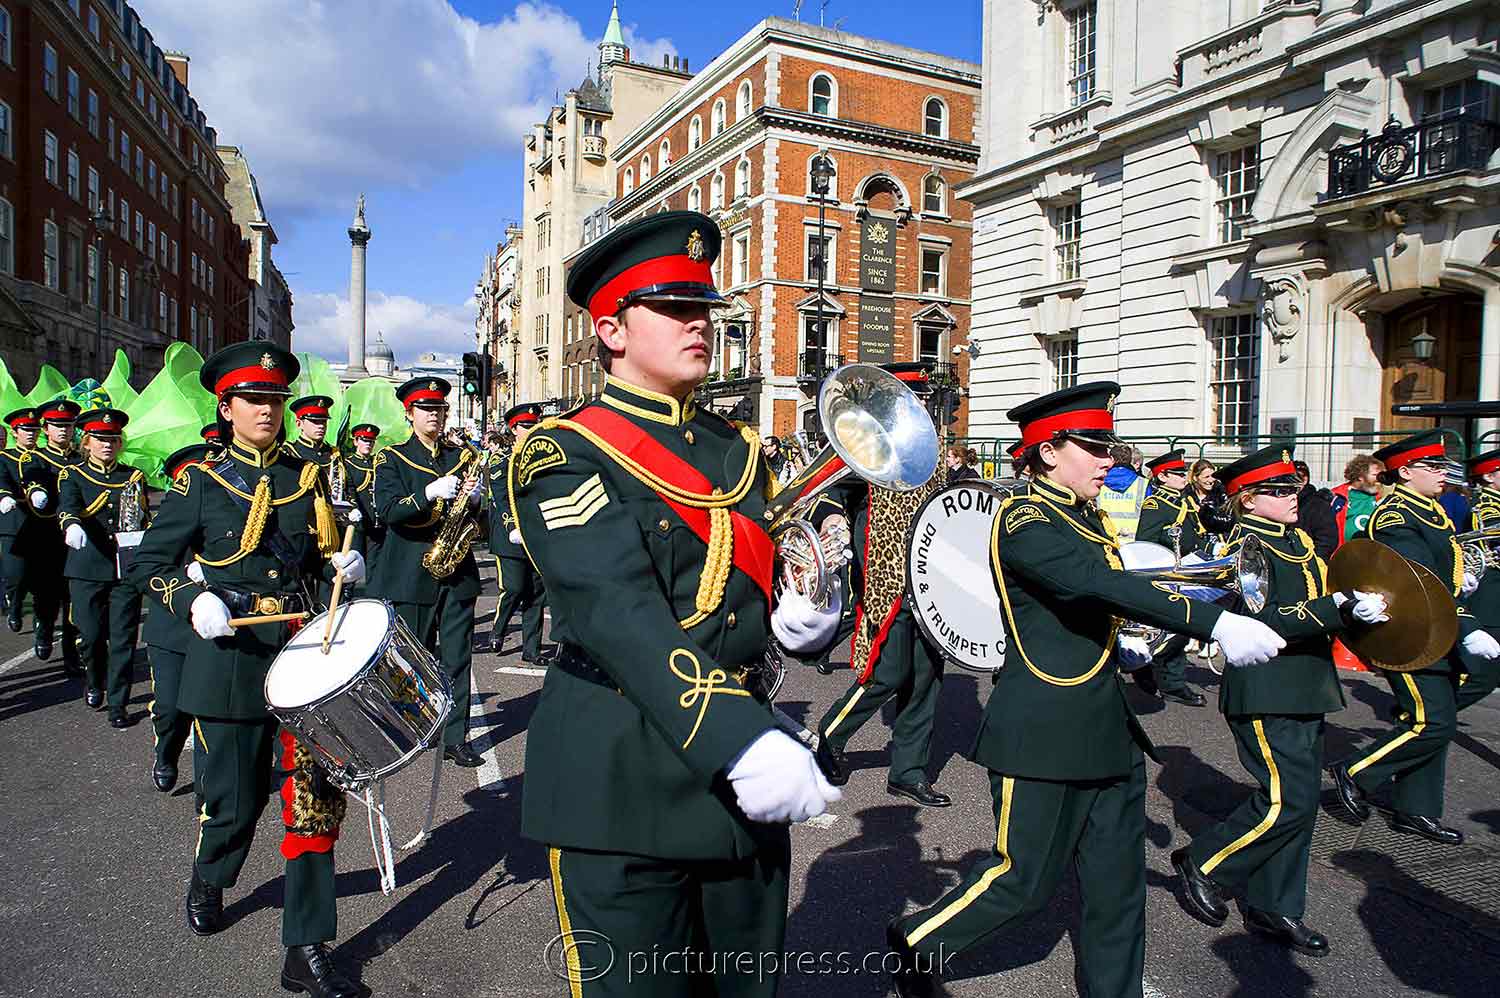 St Patricks Day parade in london marching band of musicians in uniform. photograph taken for brochure by mike kelly photographer picturepress. 